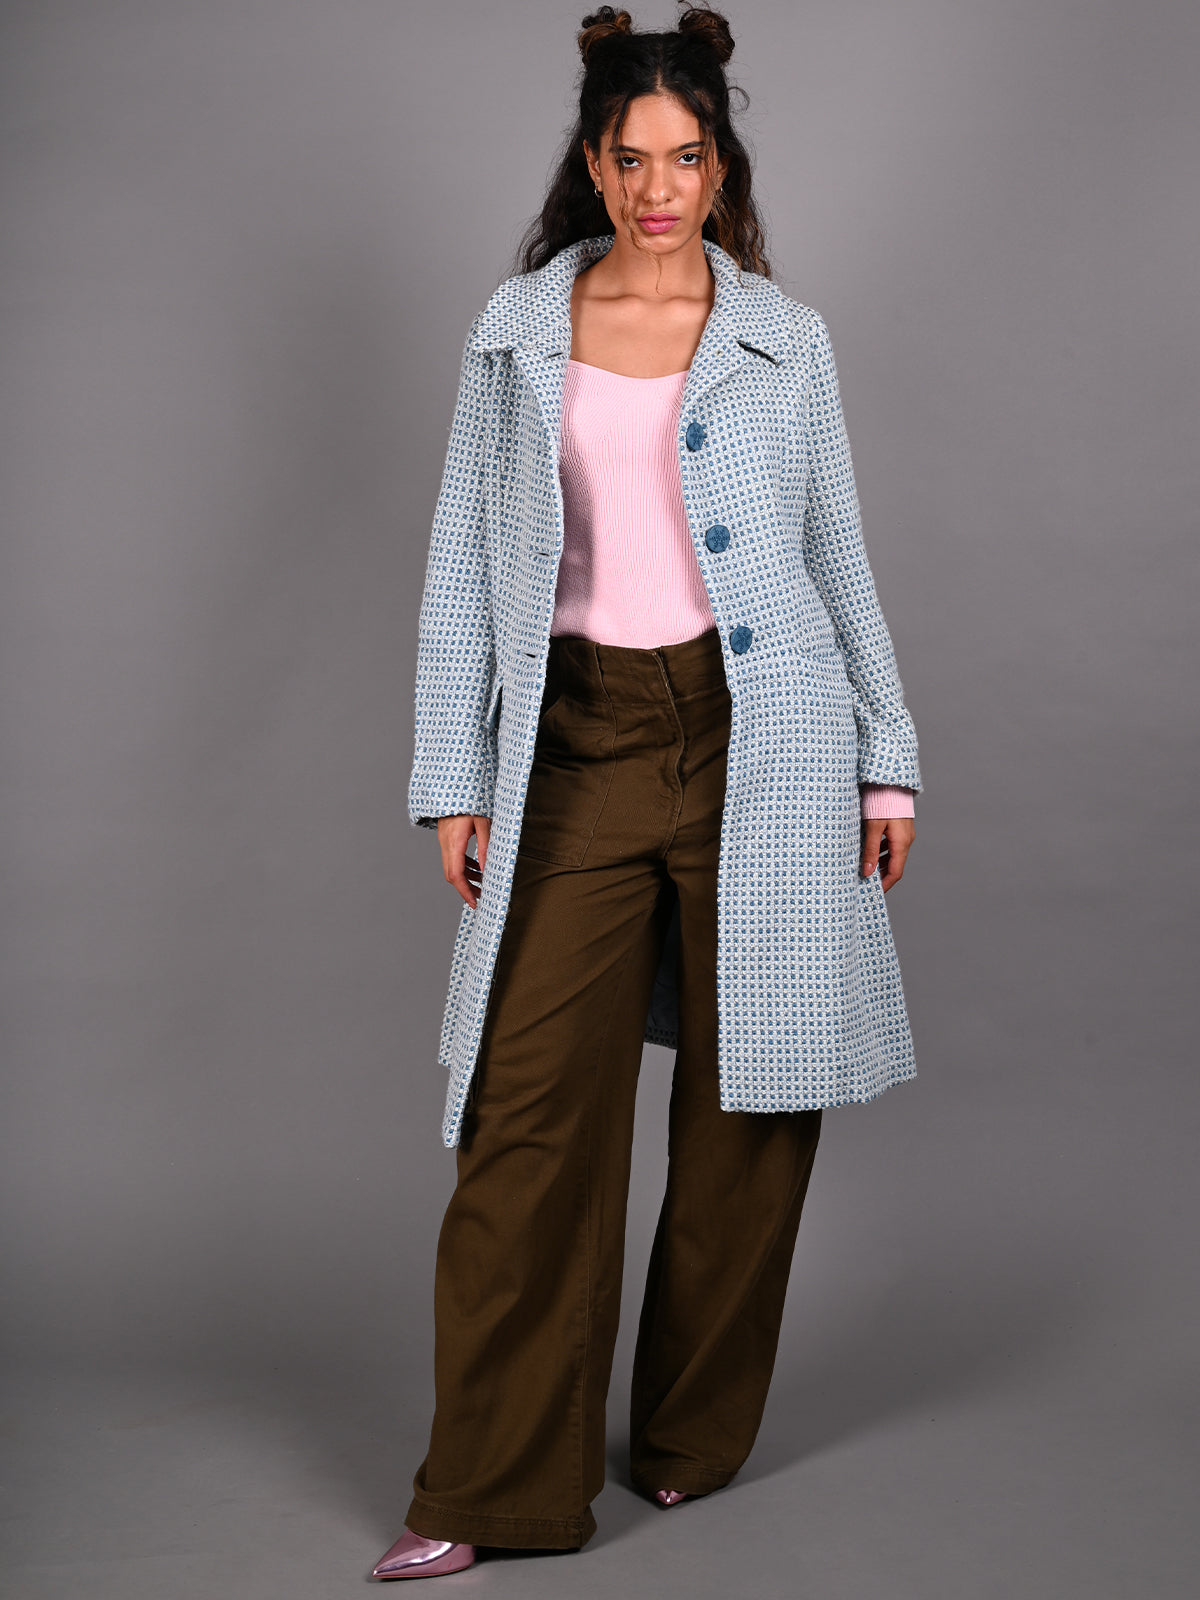 Odette Blue and White Tweed Overcoat for Women